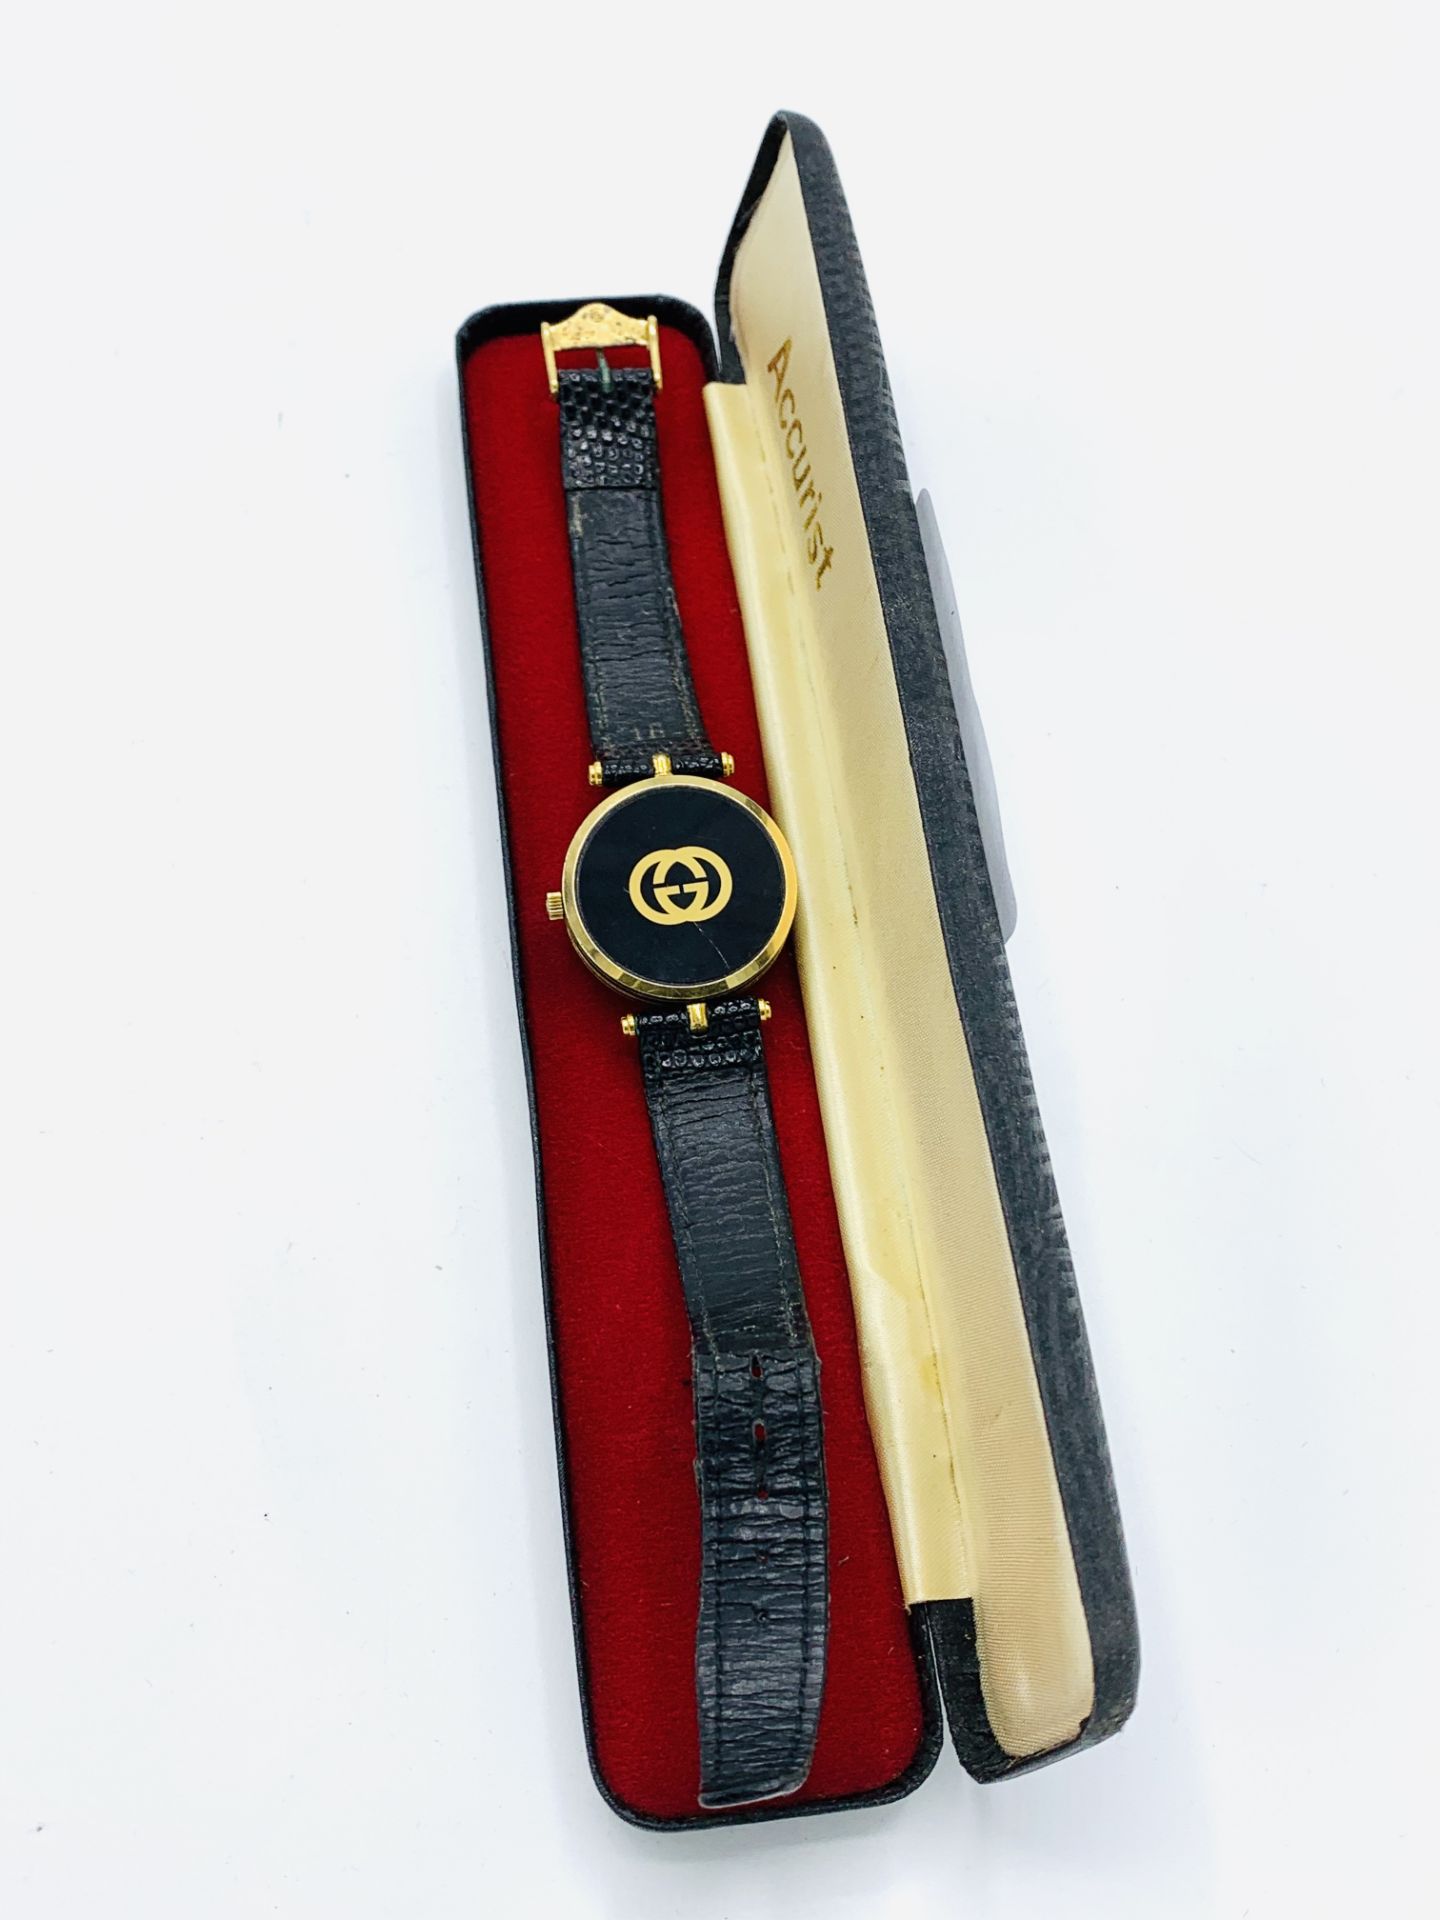 Gucci gold plated and black wrist watch with original strap - Image 5 of 5